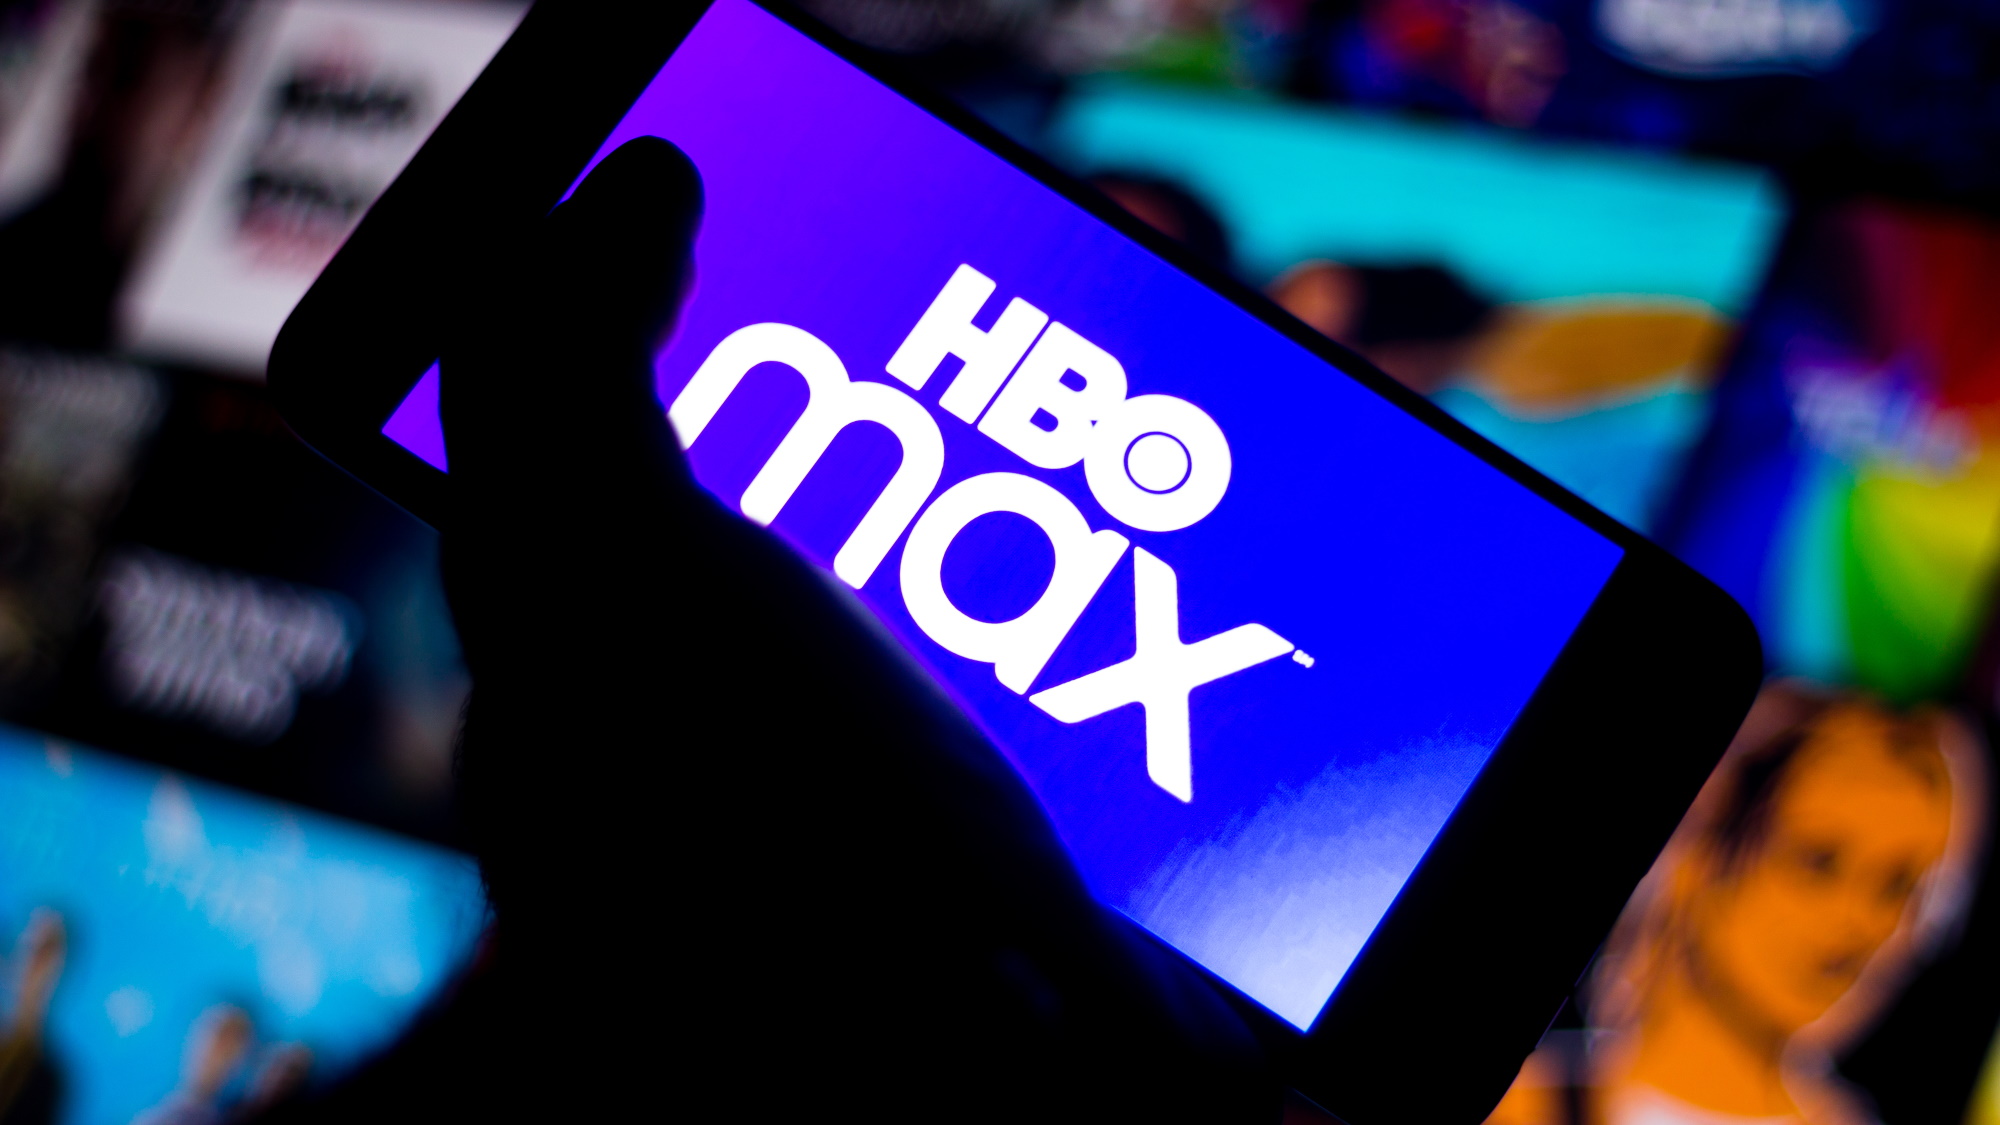 Hbo max